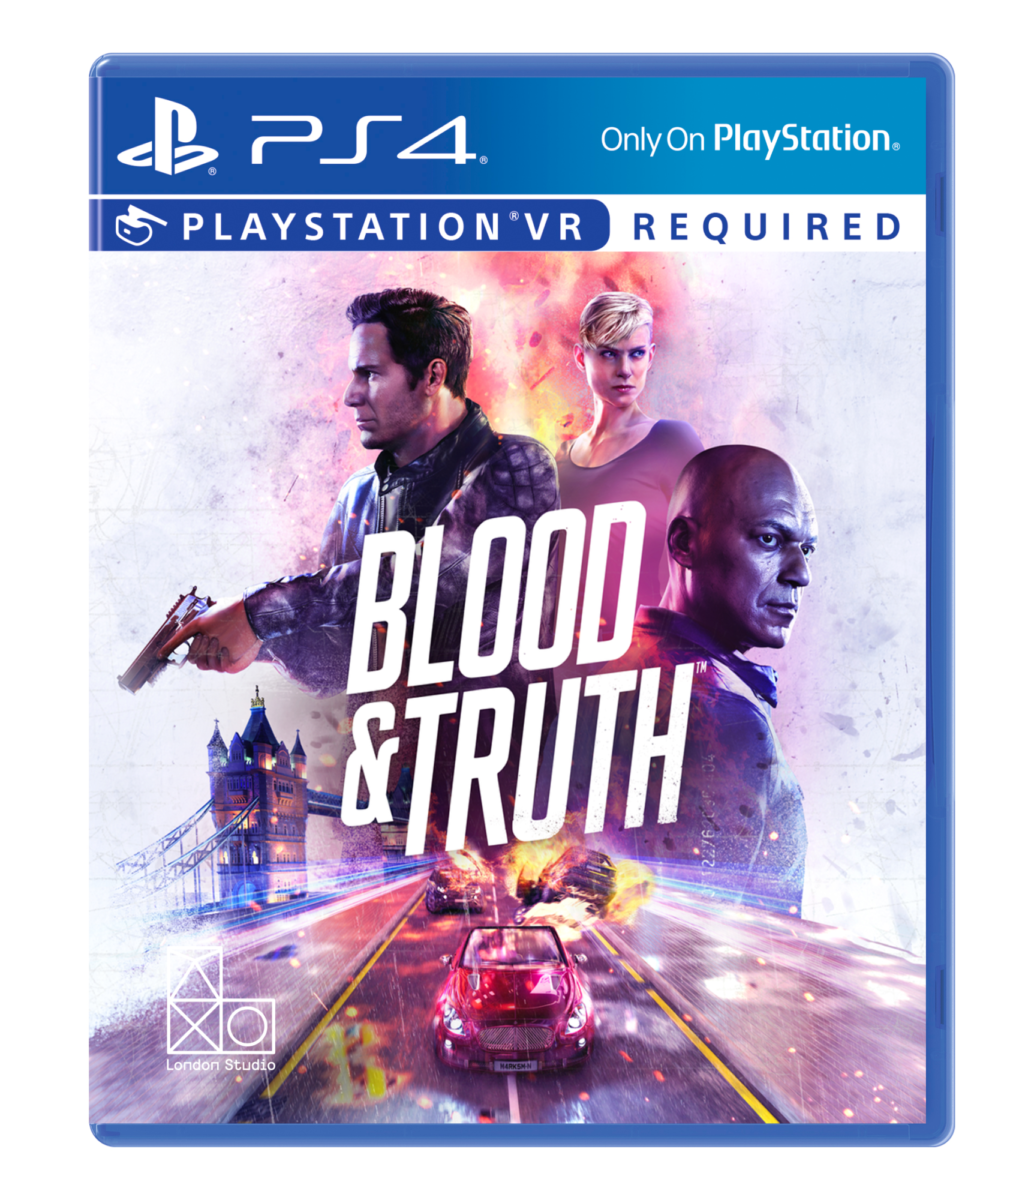 Blood &Amp; Truth Will Be Released On May 28, 2019 On The Playstation®Vr